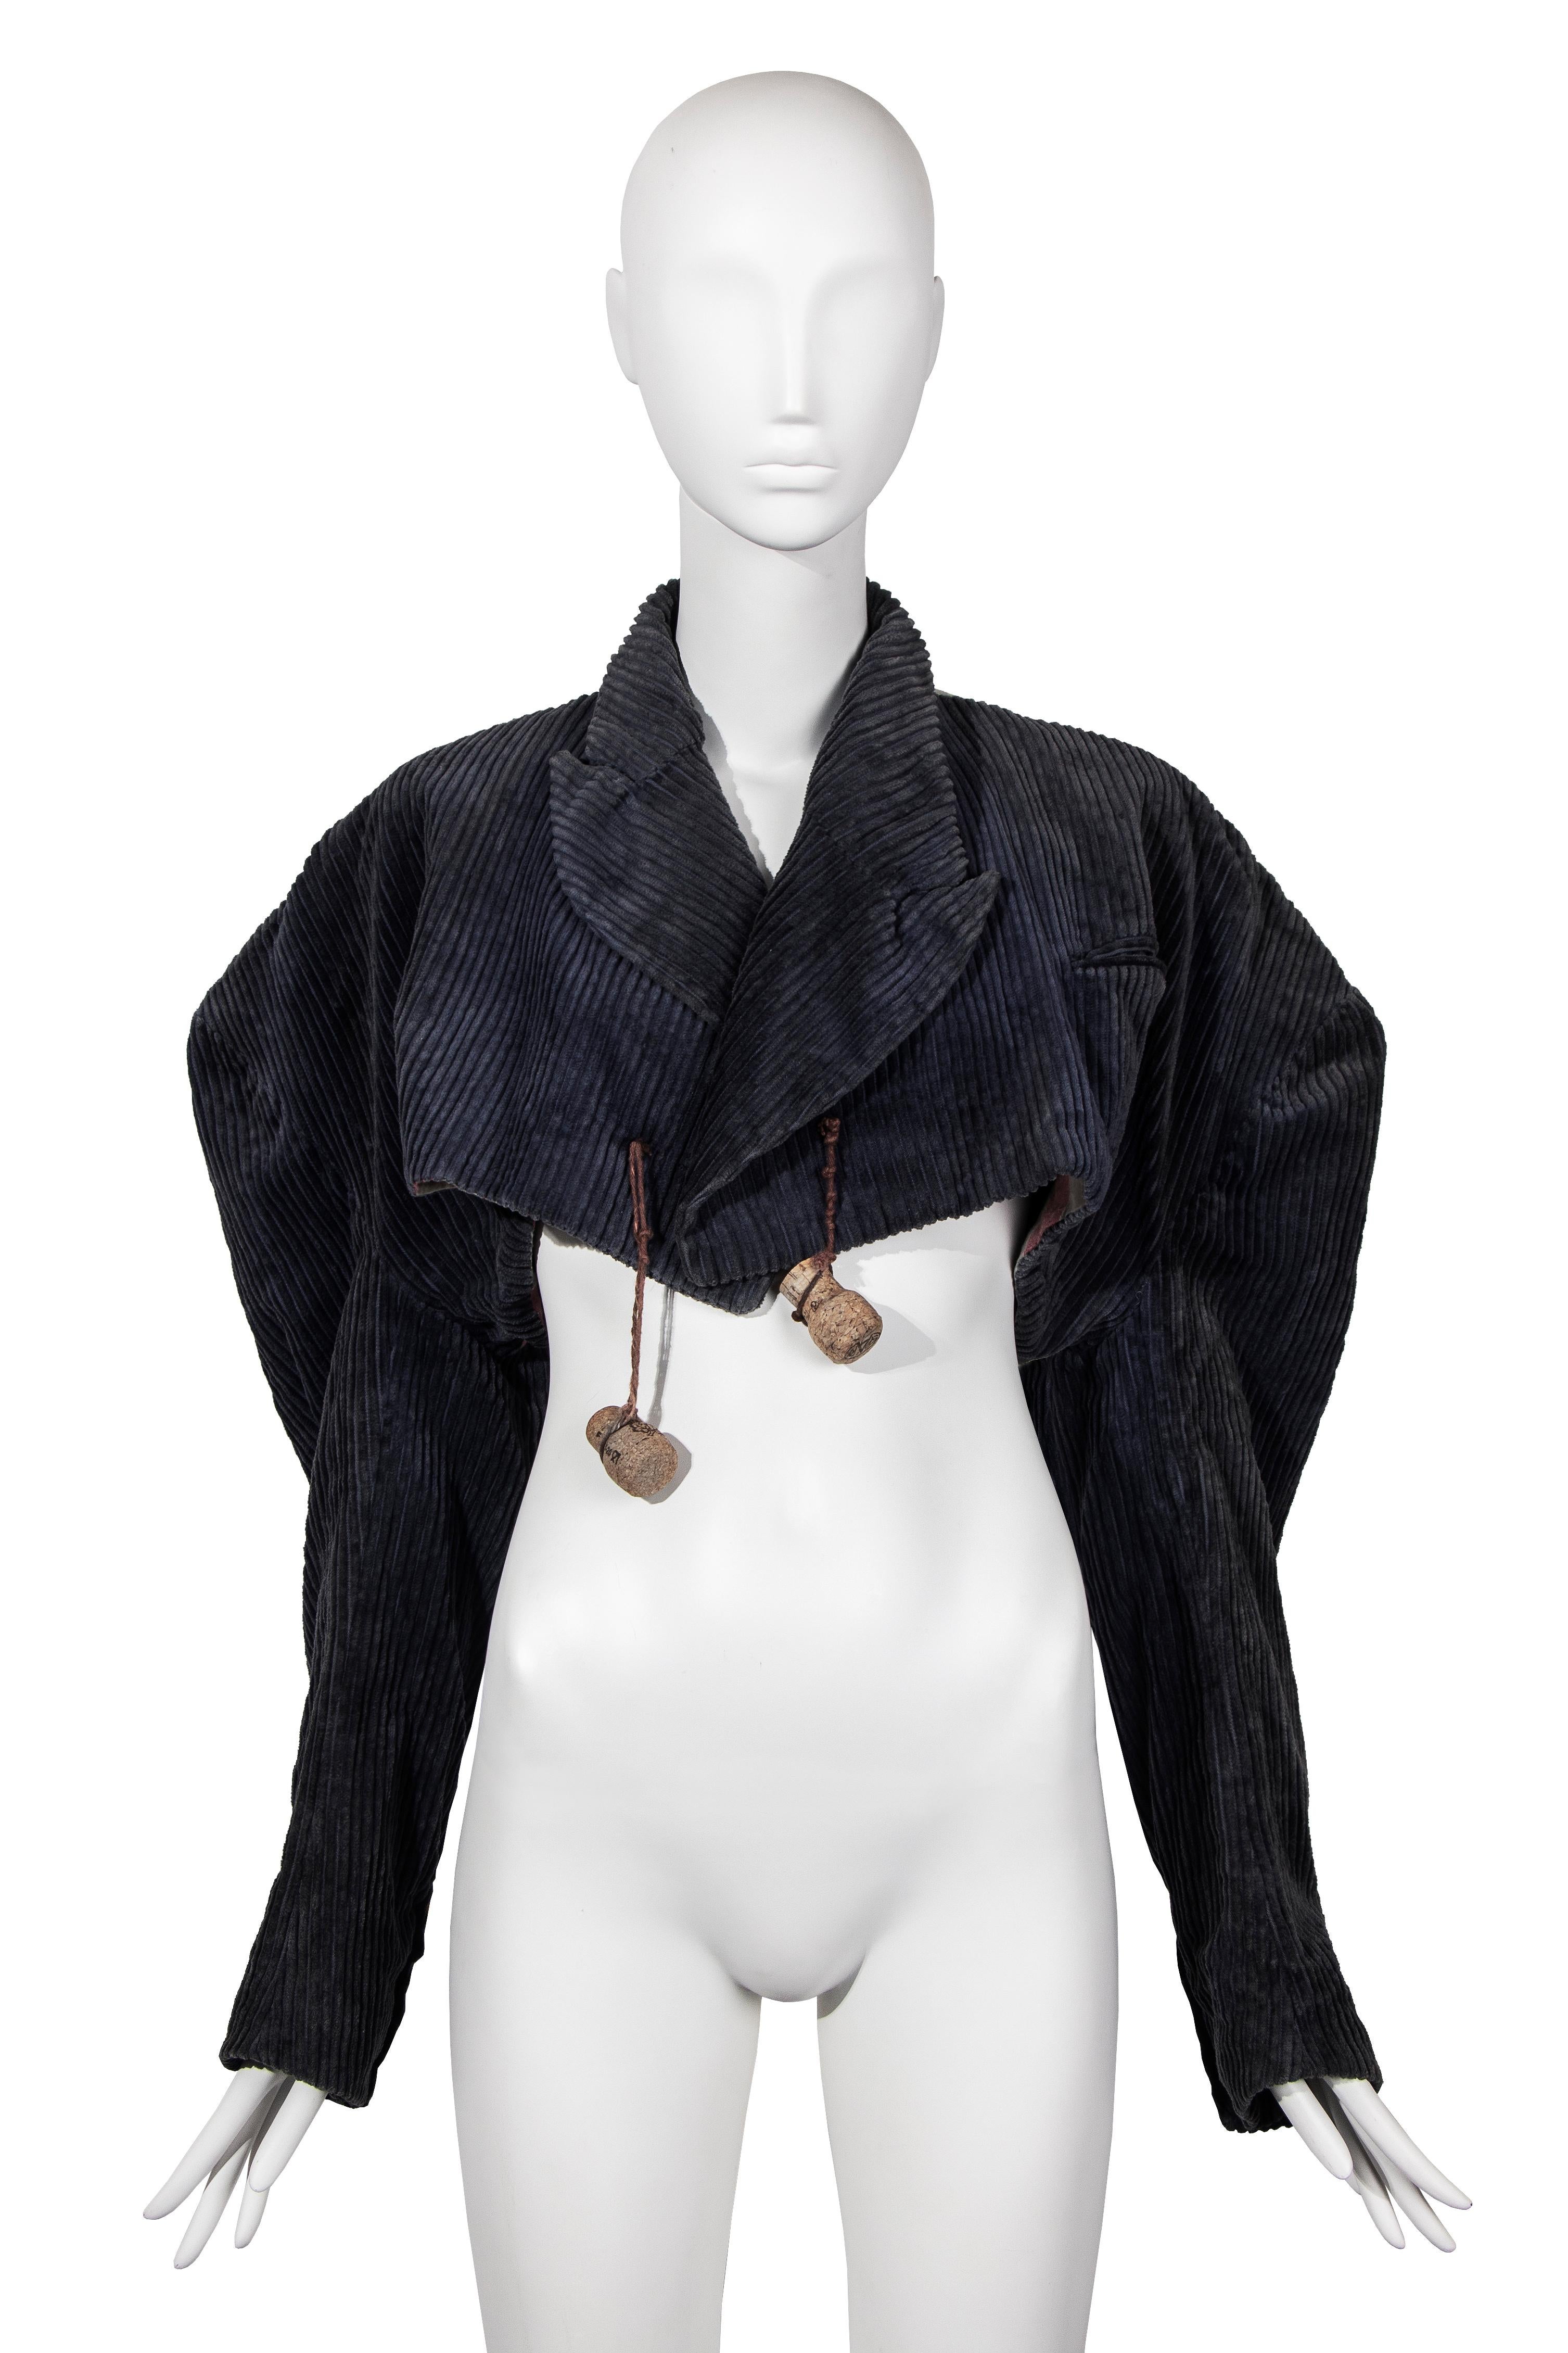 John Galliano 'The Ludic Games' spencer jacket & oversized shirt pair, fw 1985 For Sale 4